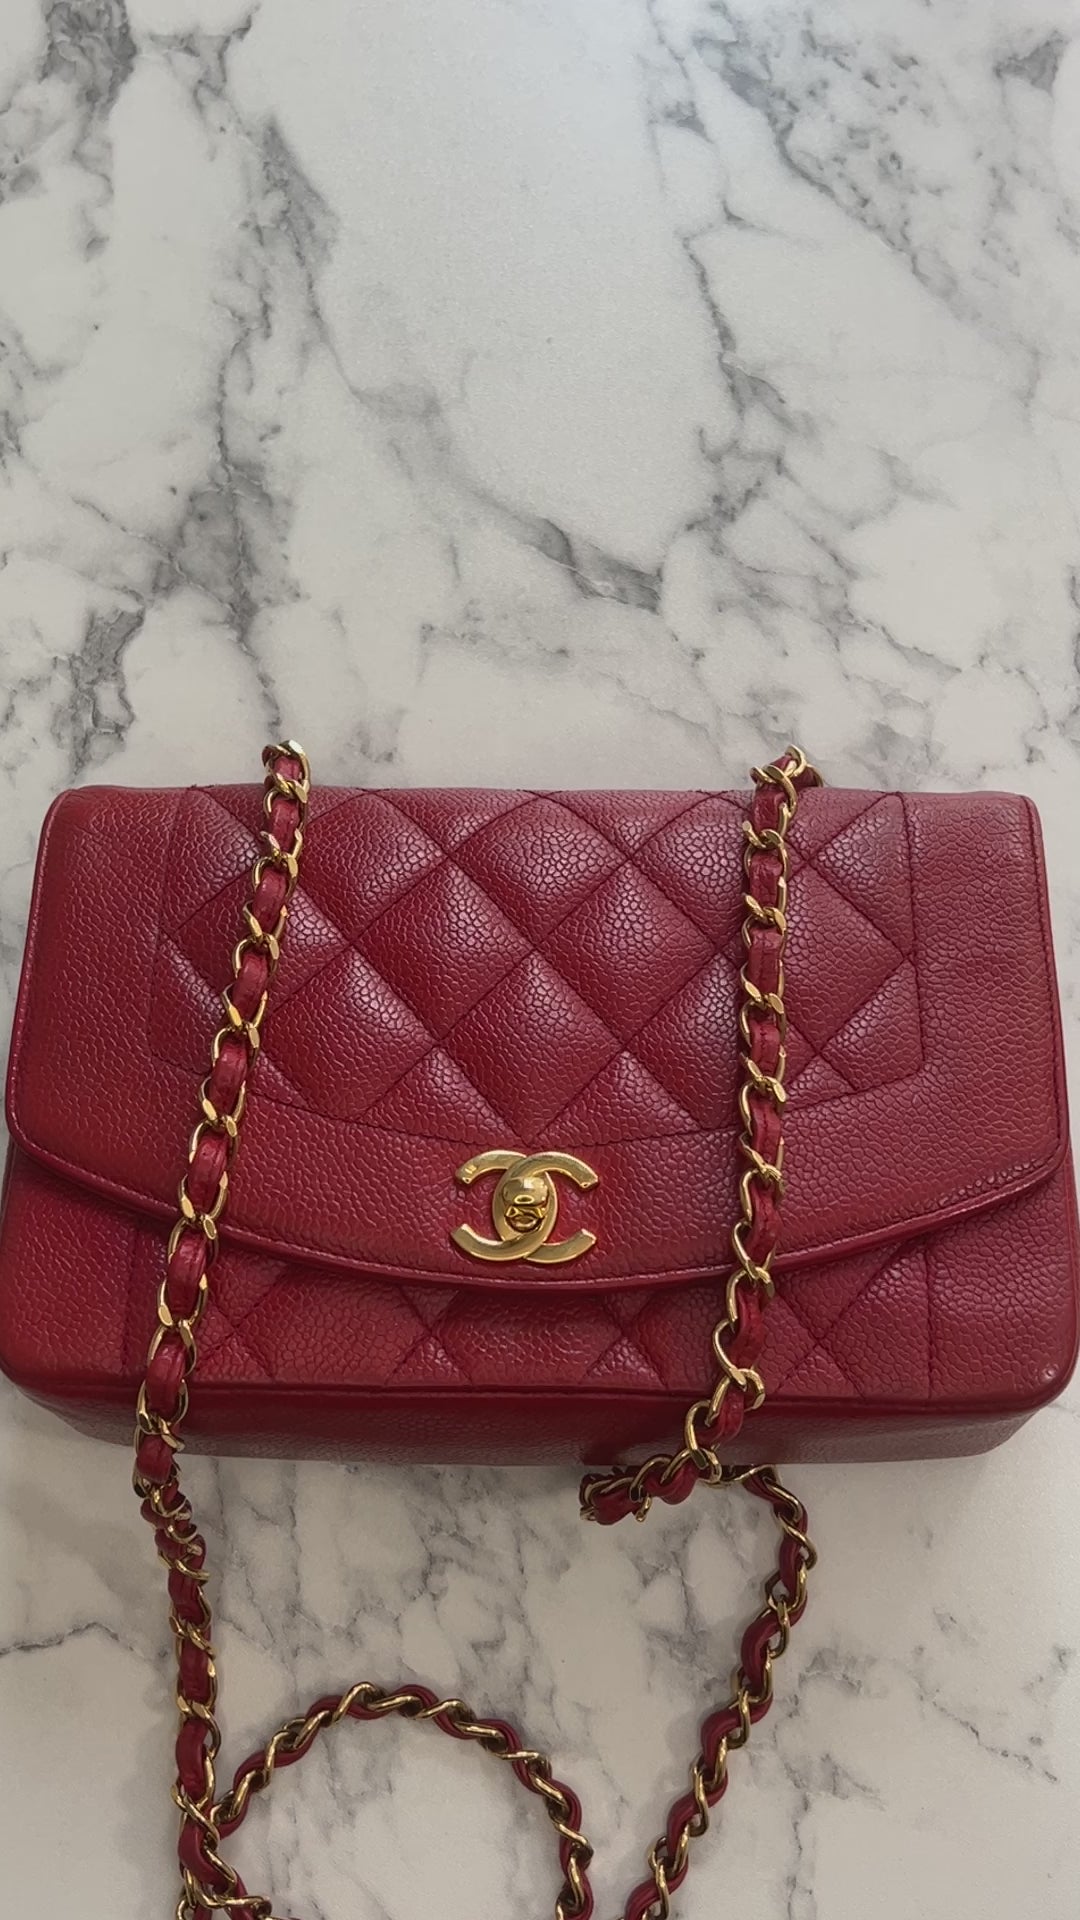 Chanel Vintage Rare Red Caviar Small Diana Flap